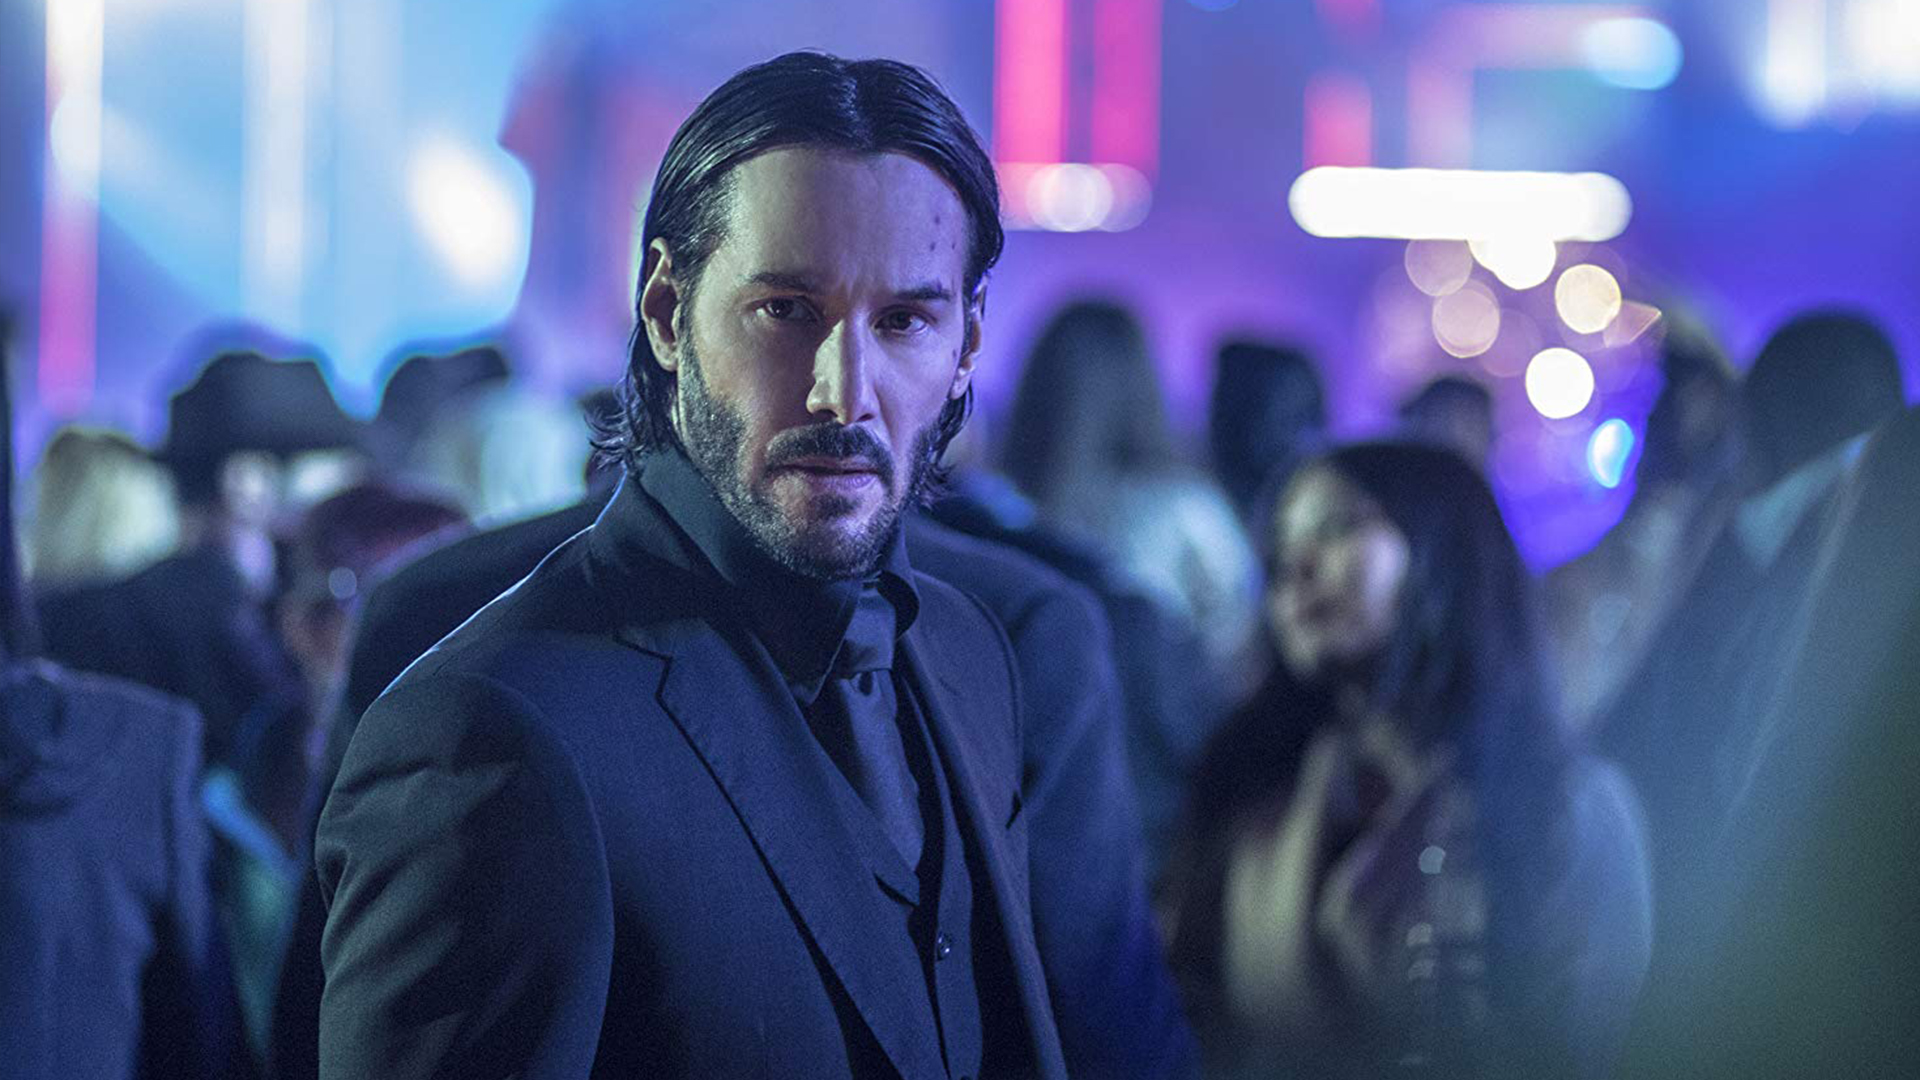 A rain soaked John Wick searches for someone in a neon setting in one of his movies